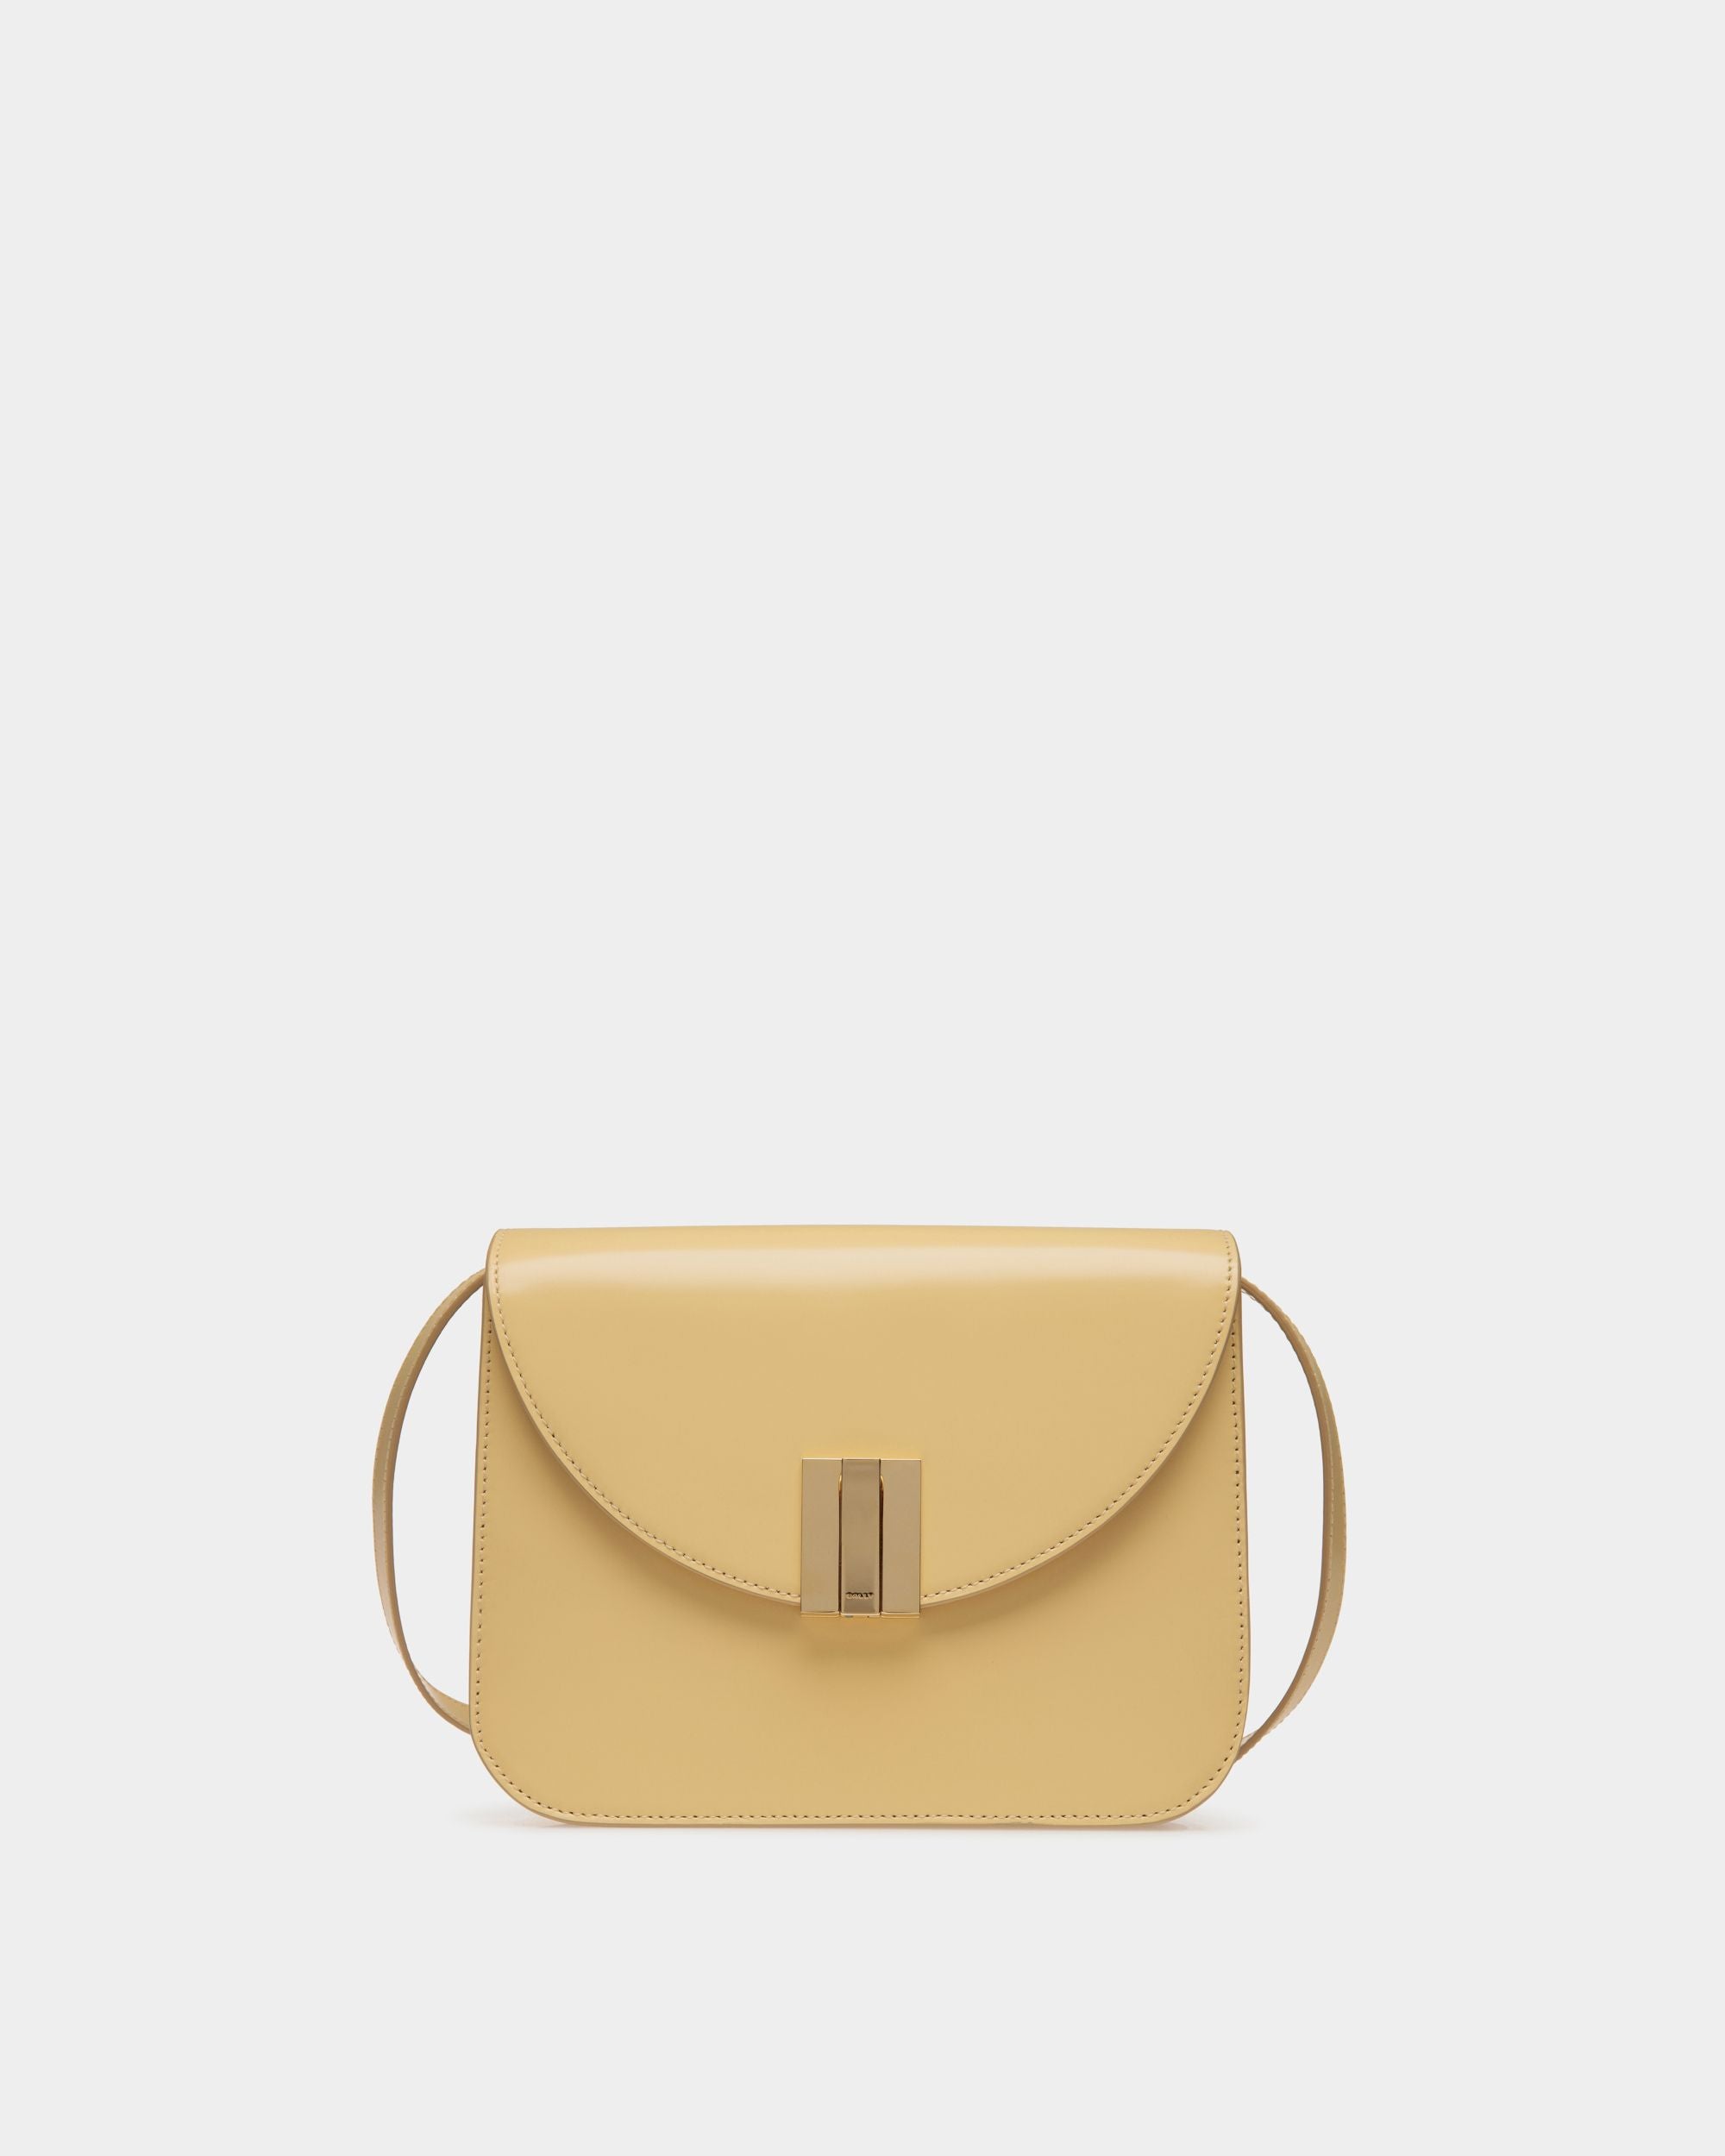 Ollam | Women's Crossbody Bag in Cream Brushed Leather | Bally | Still Life Front